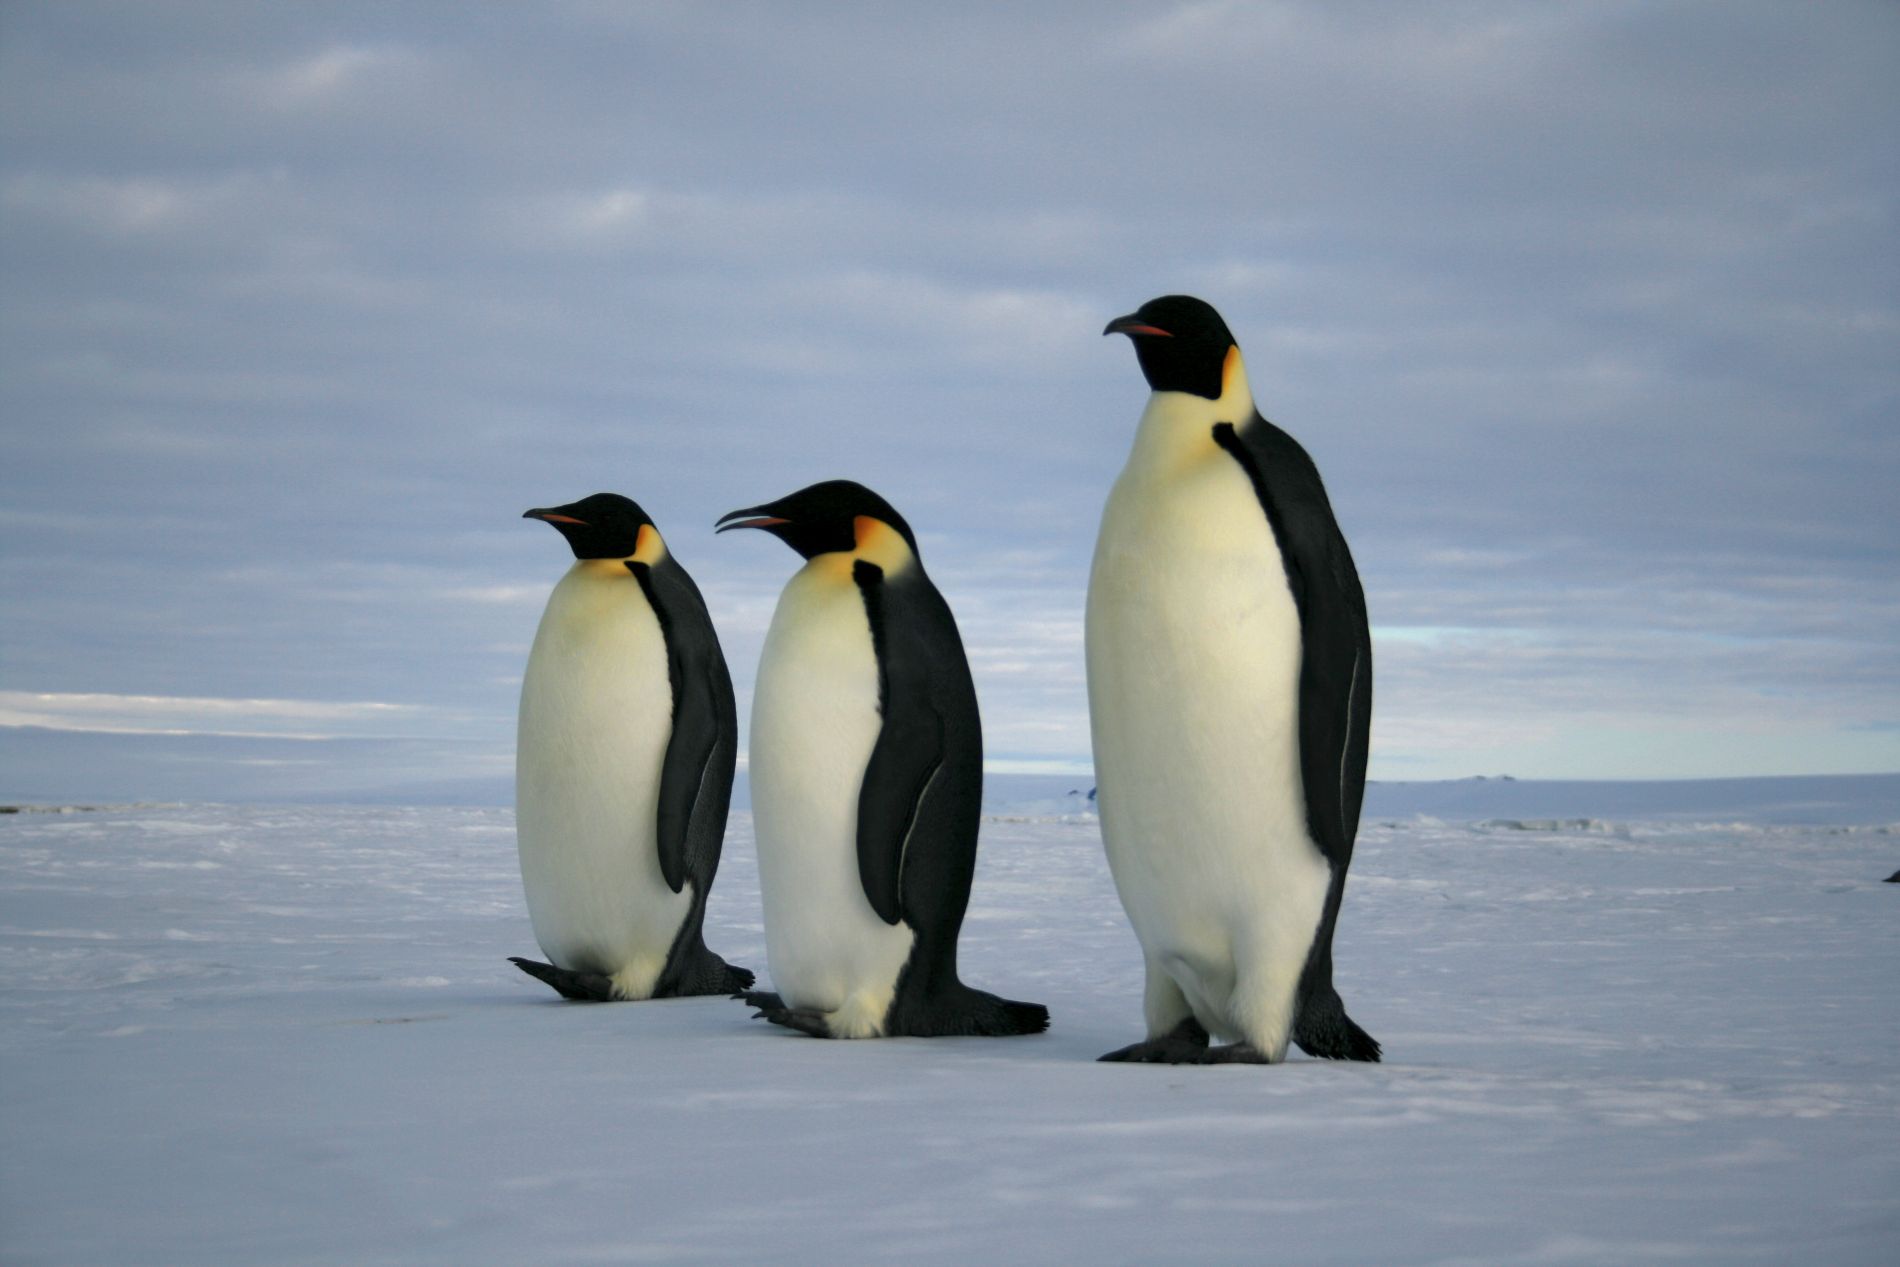 Emperor penguins by Lin Padgham via Wikimedia Commons